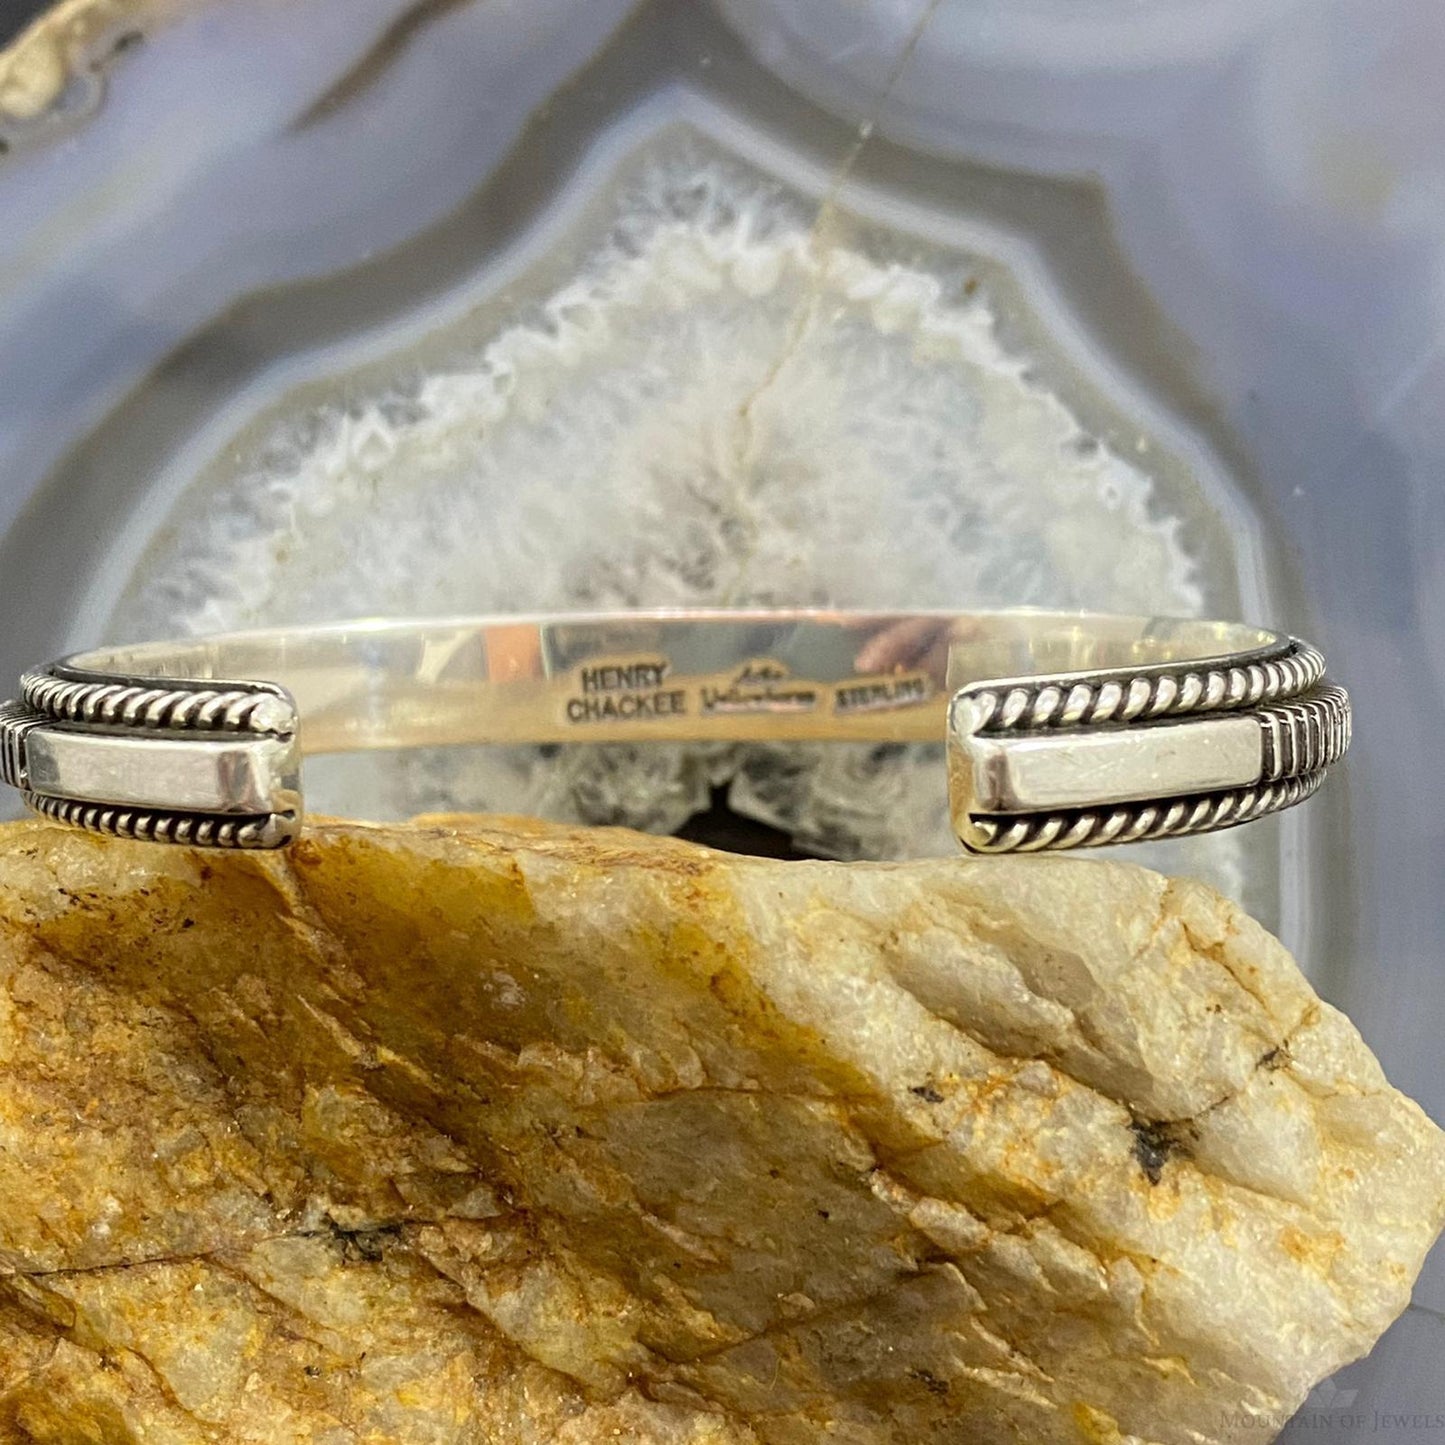 Artie Yellowhorse/Henry Chackee Native American Engraved Bracelet For Women